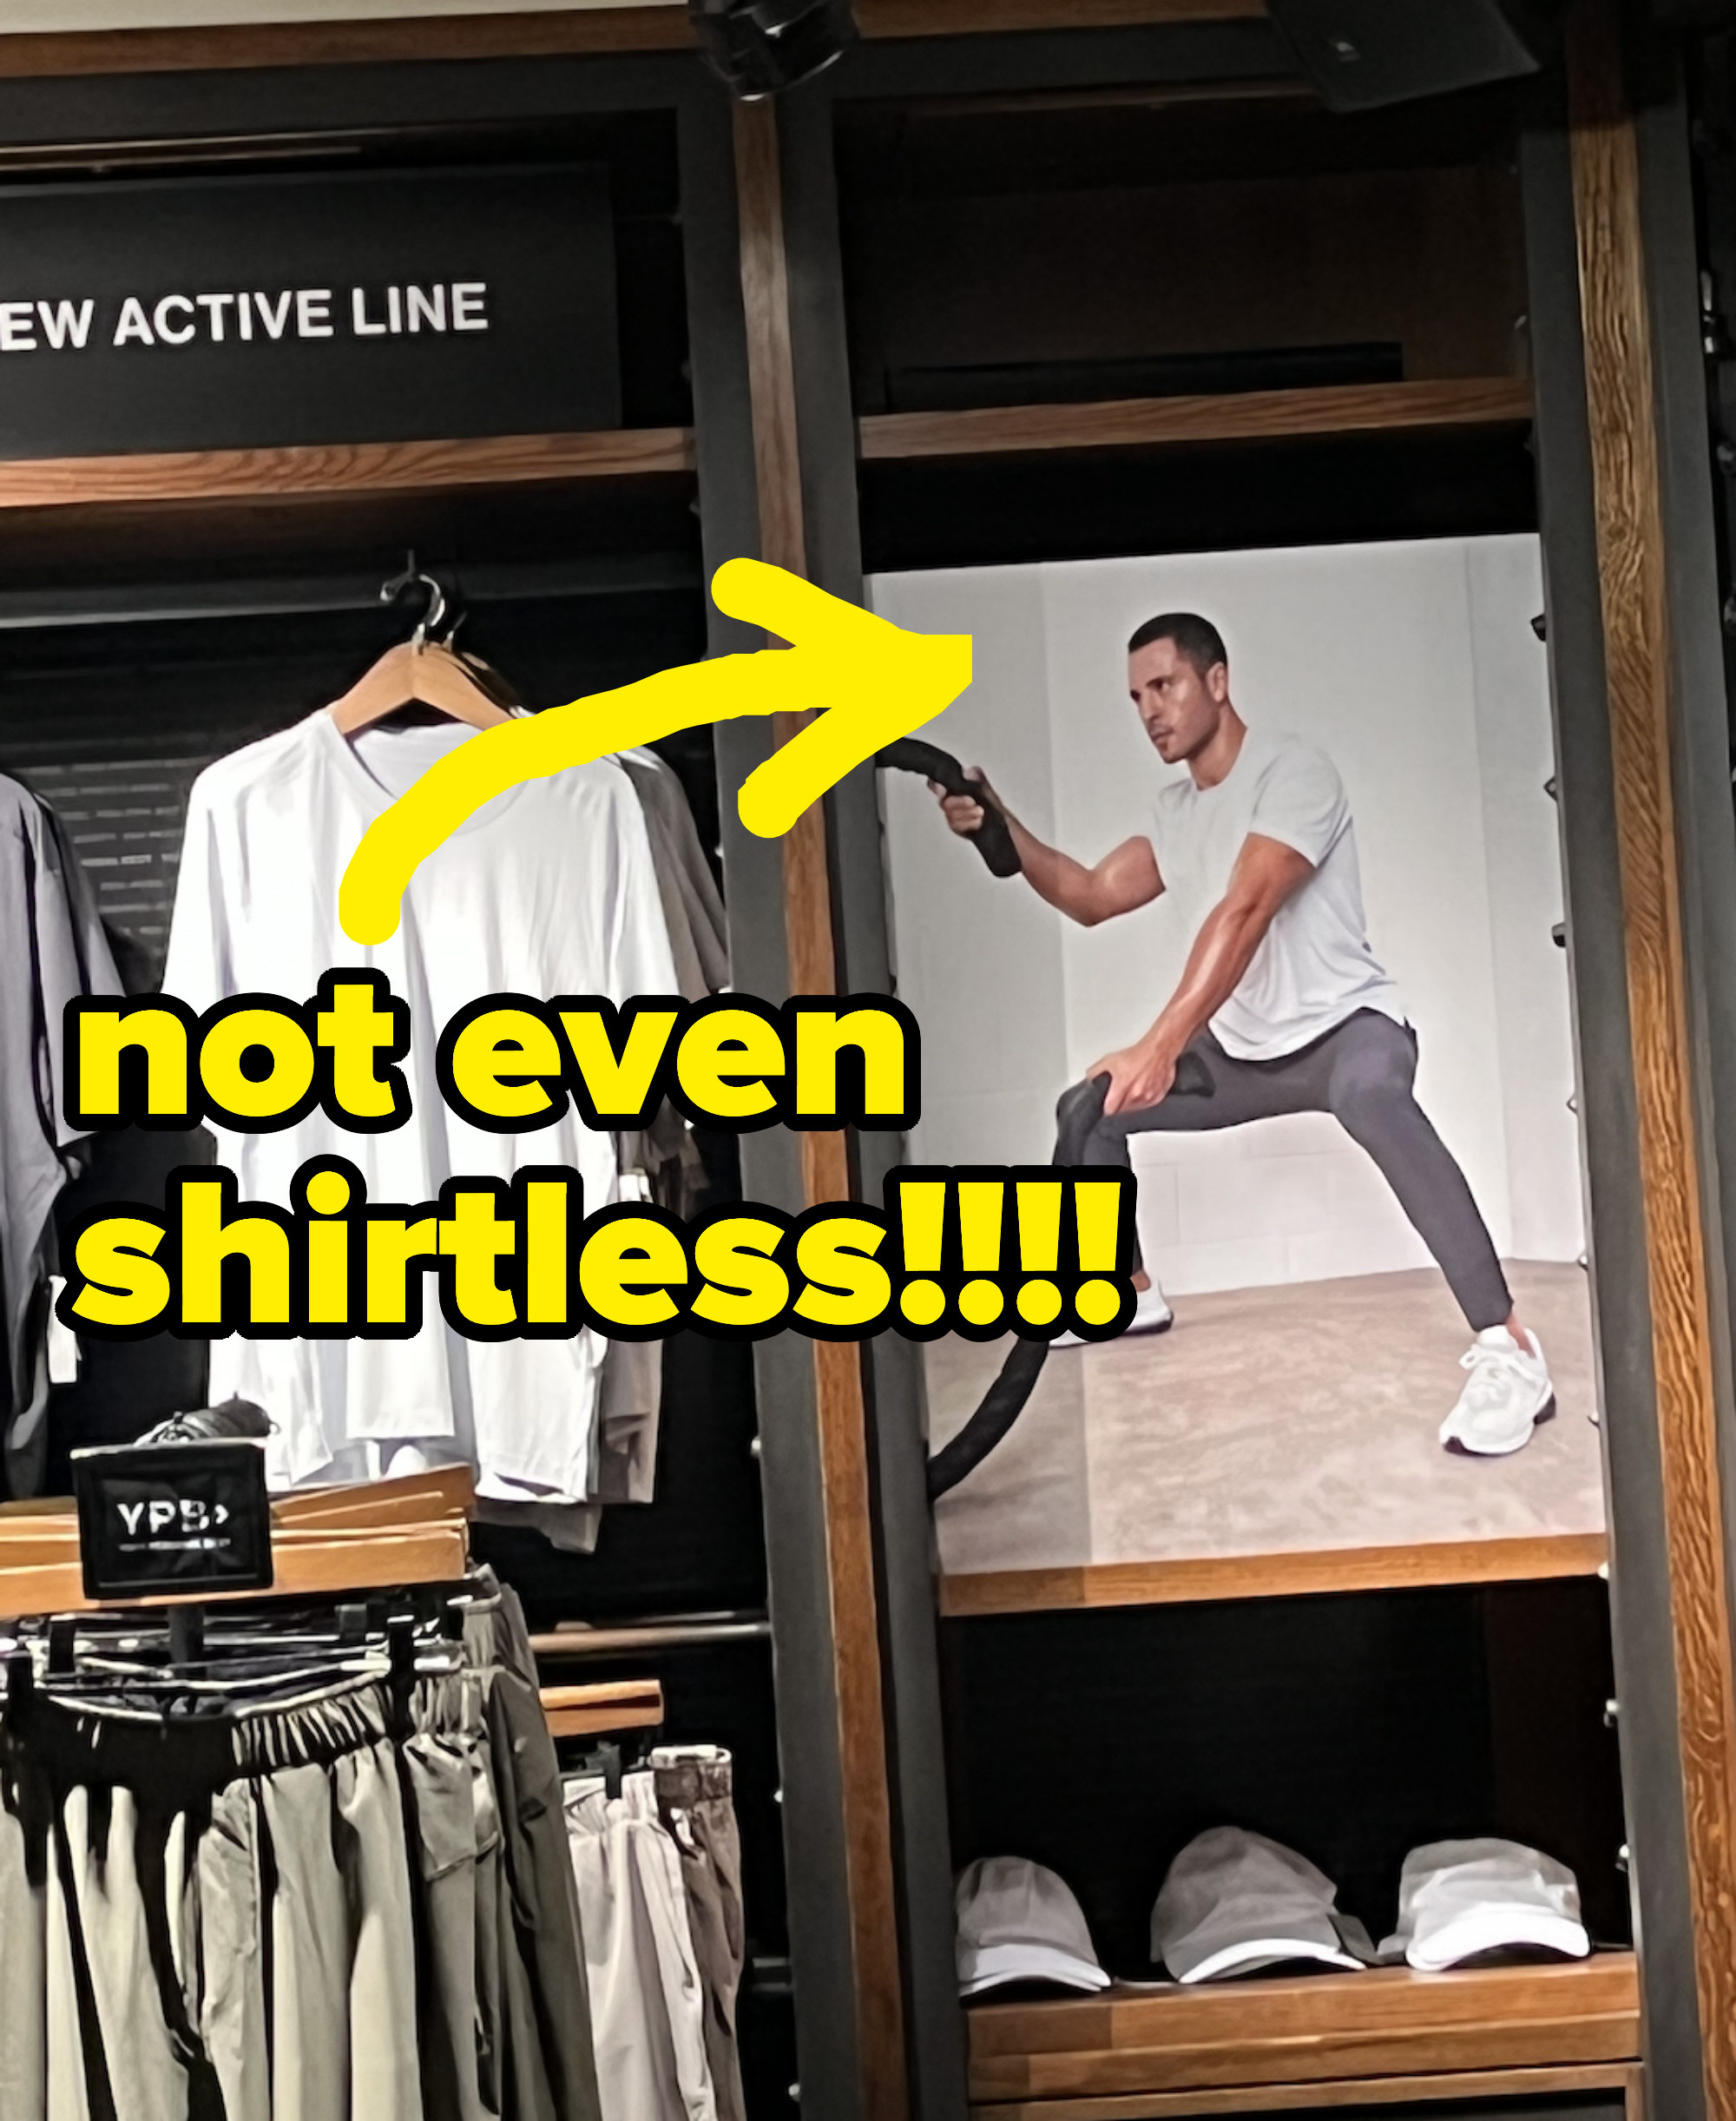 An arrow pointing to a photo of a man working out amid clothing displays with the text &quot;not even shirtless!!&quot;